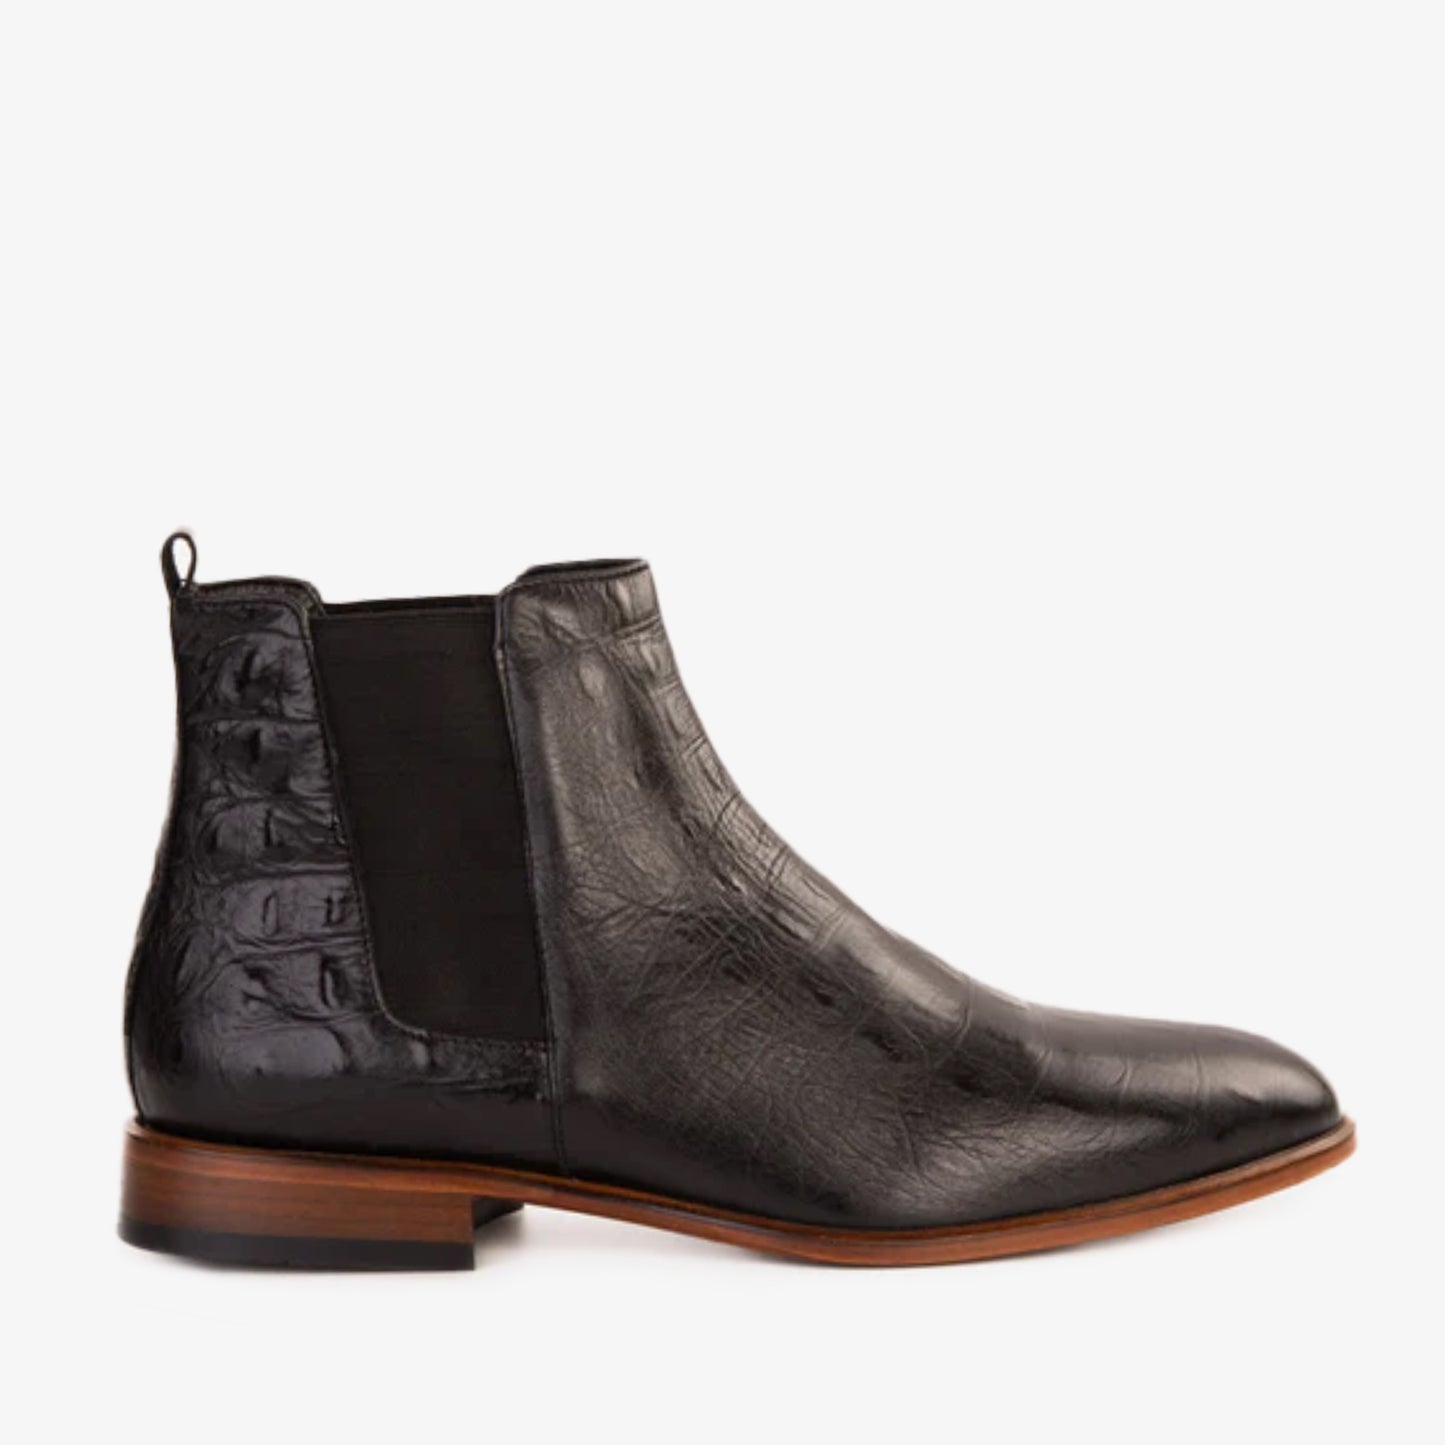 The Sirocco Black Leather Chelsea Dress Men Boot